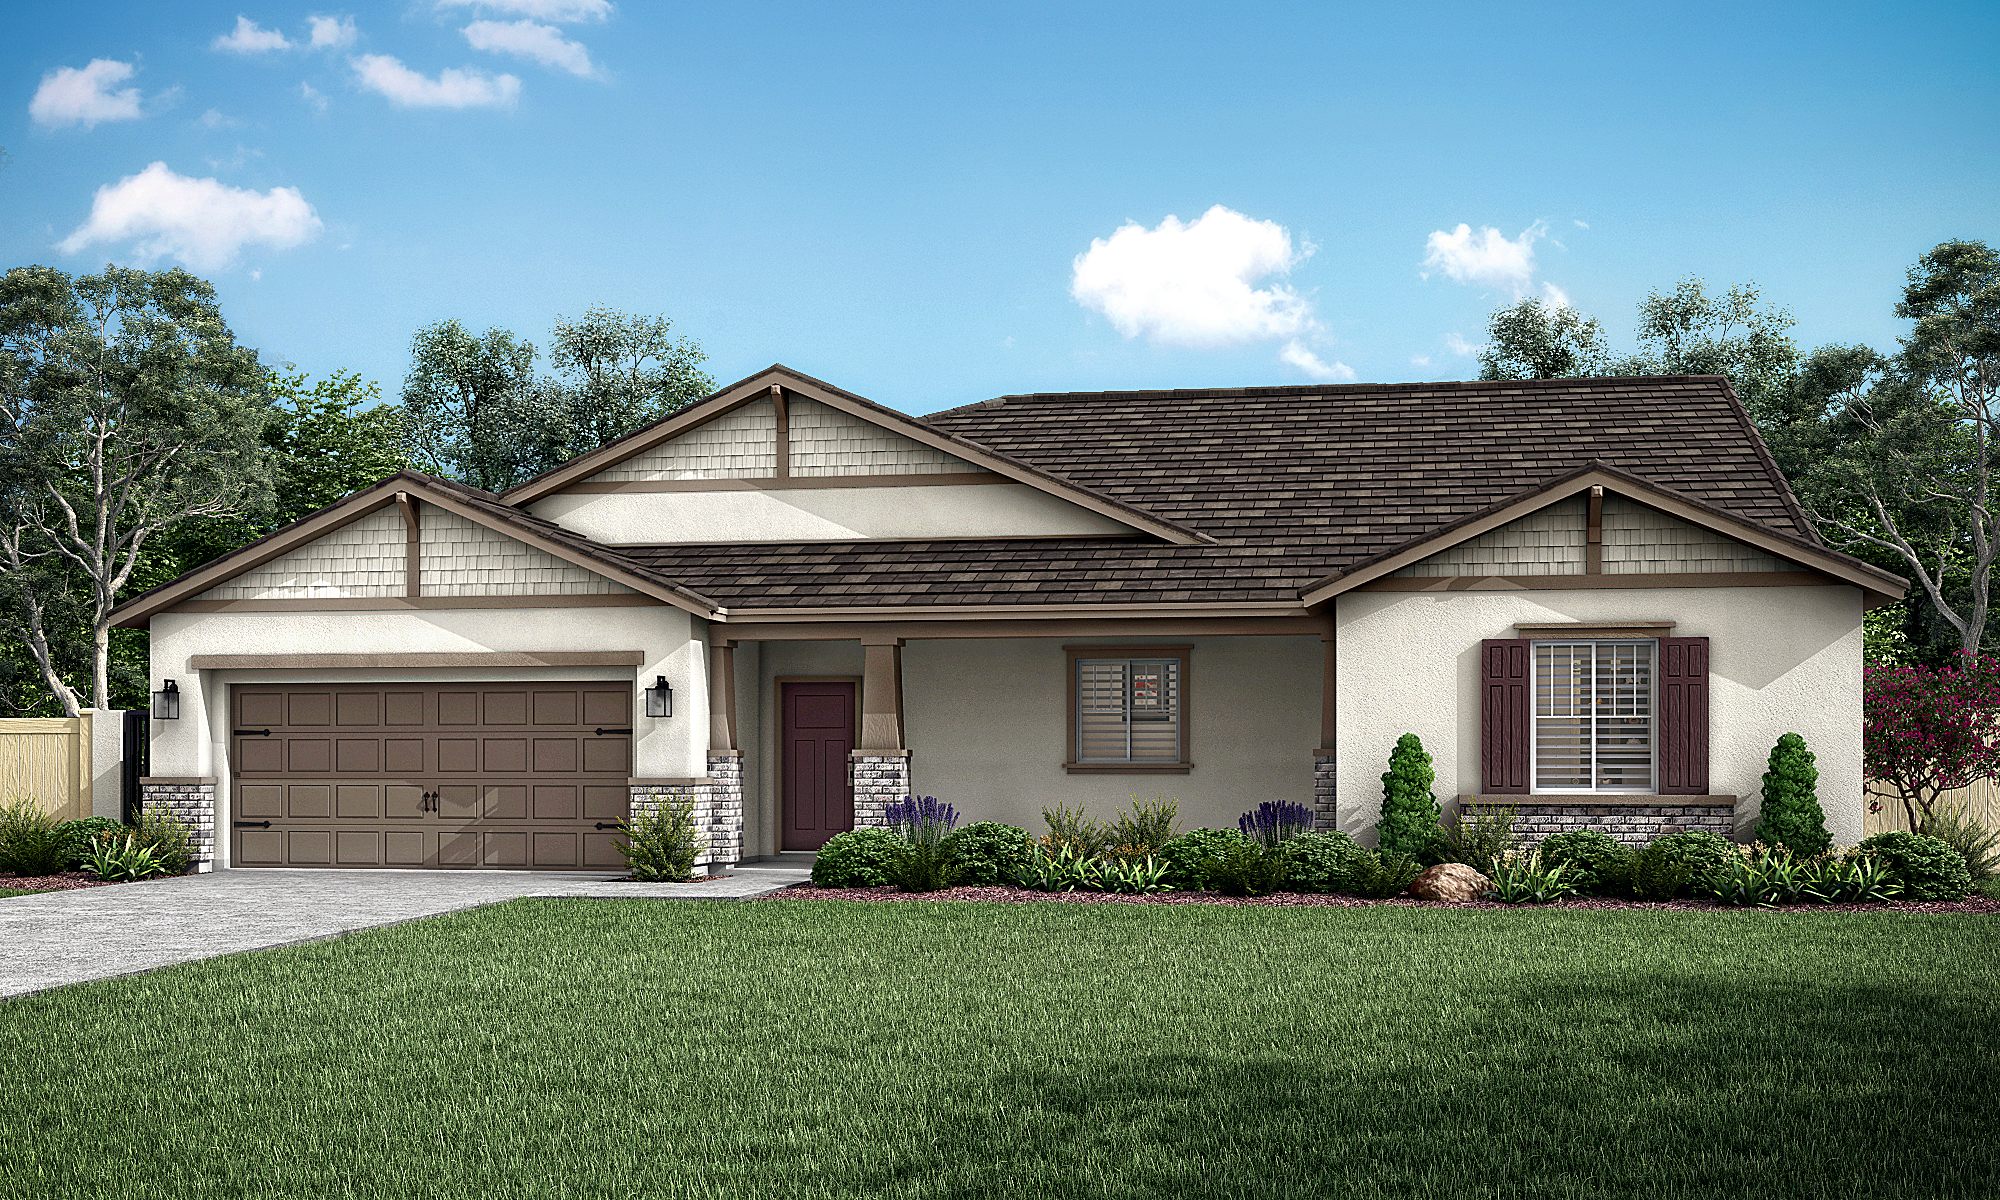 LGI Homes announces the grand opening of a new section at Morningstar Ranch, a beautiful community in Bakersfield, California.